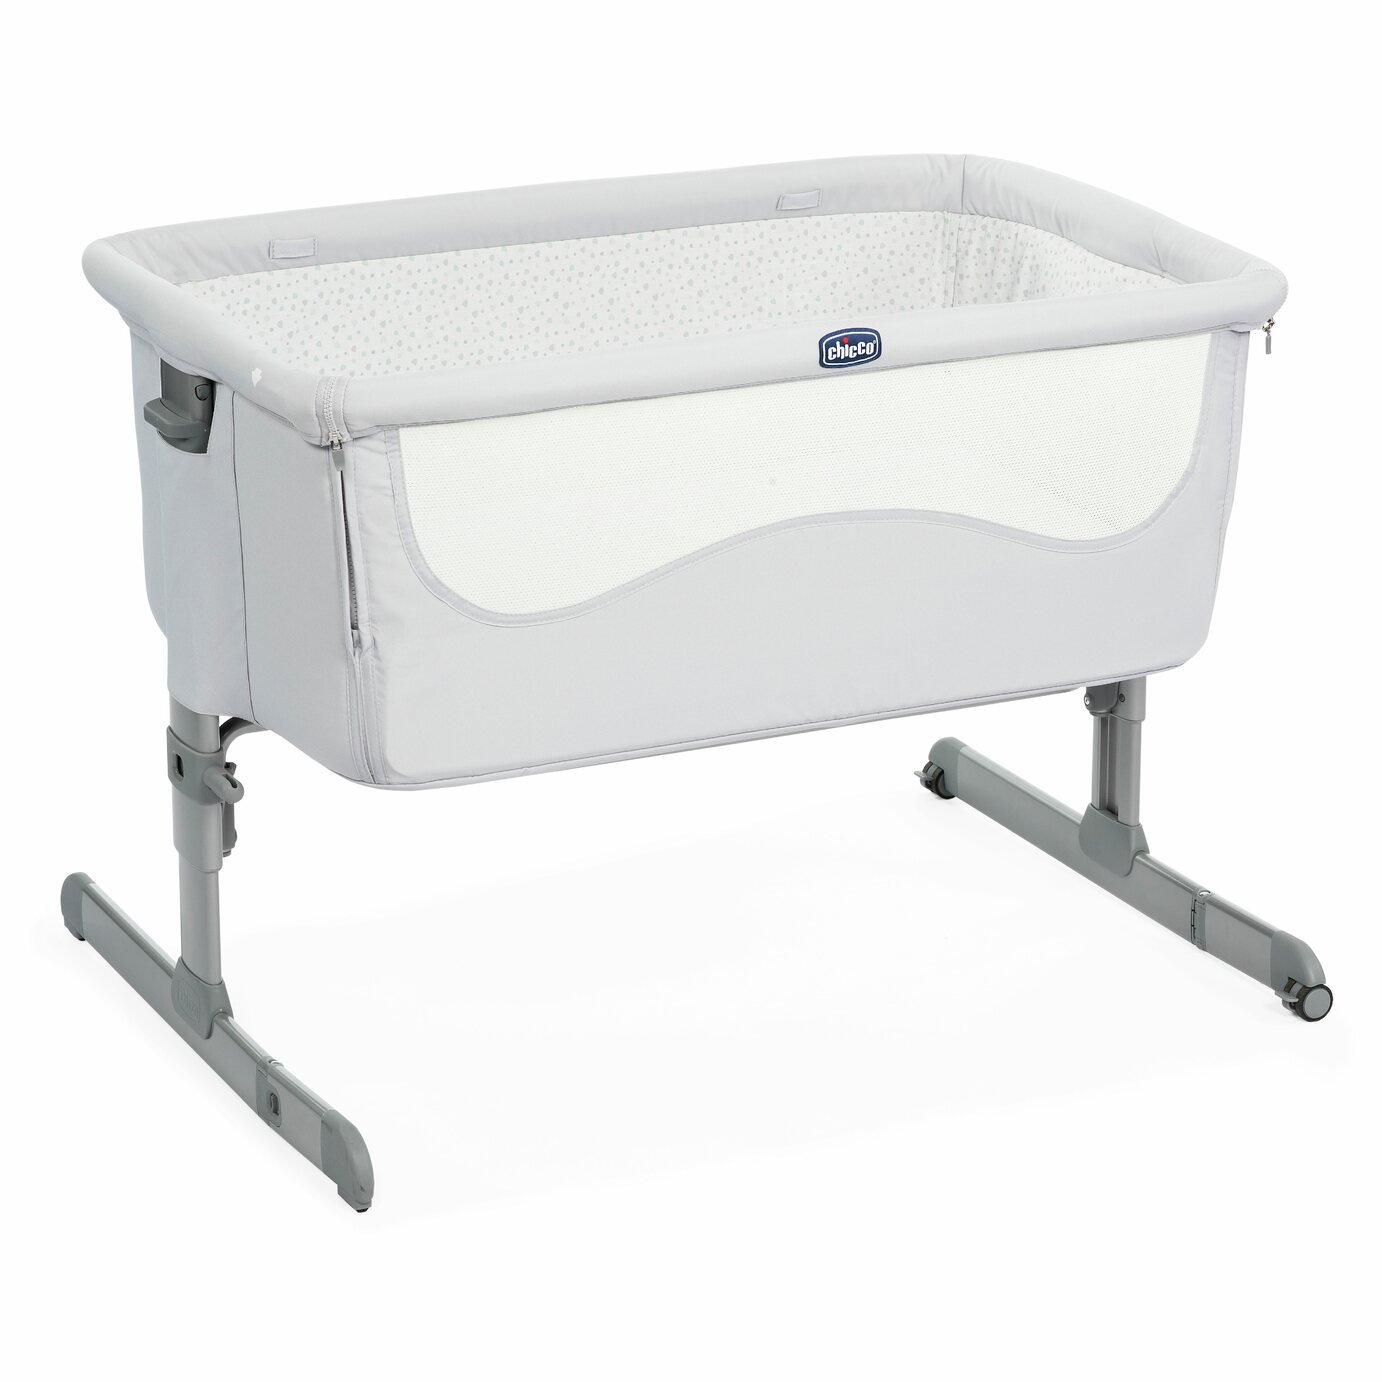 Chicco Next 2 Me Bedside Sleeper Crib Review